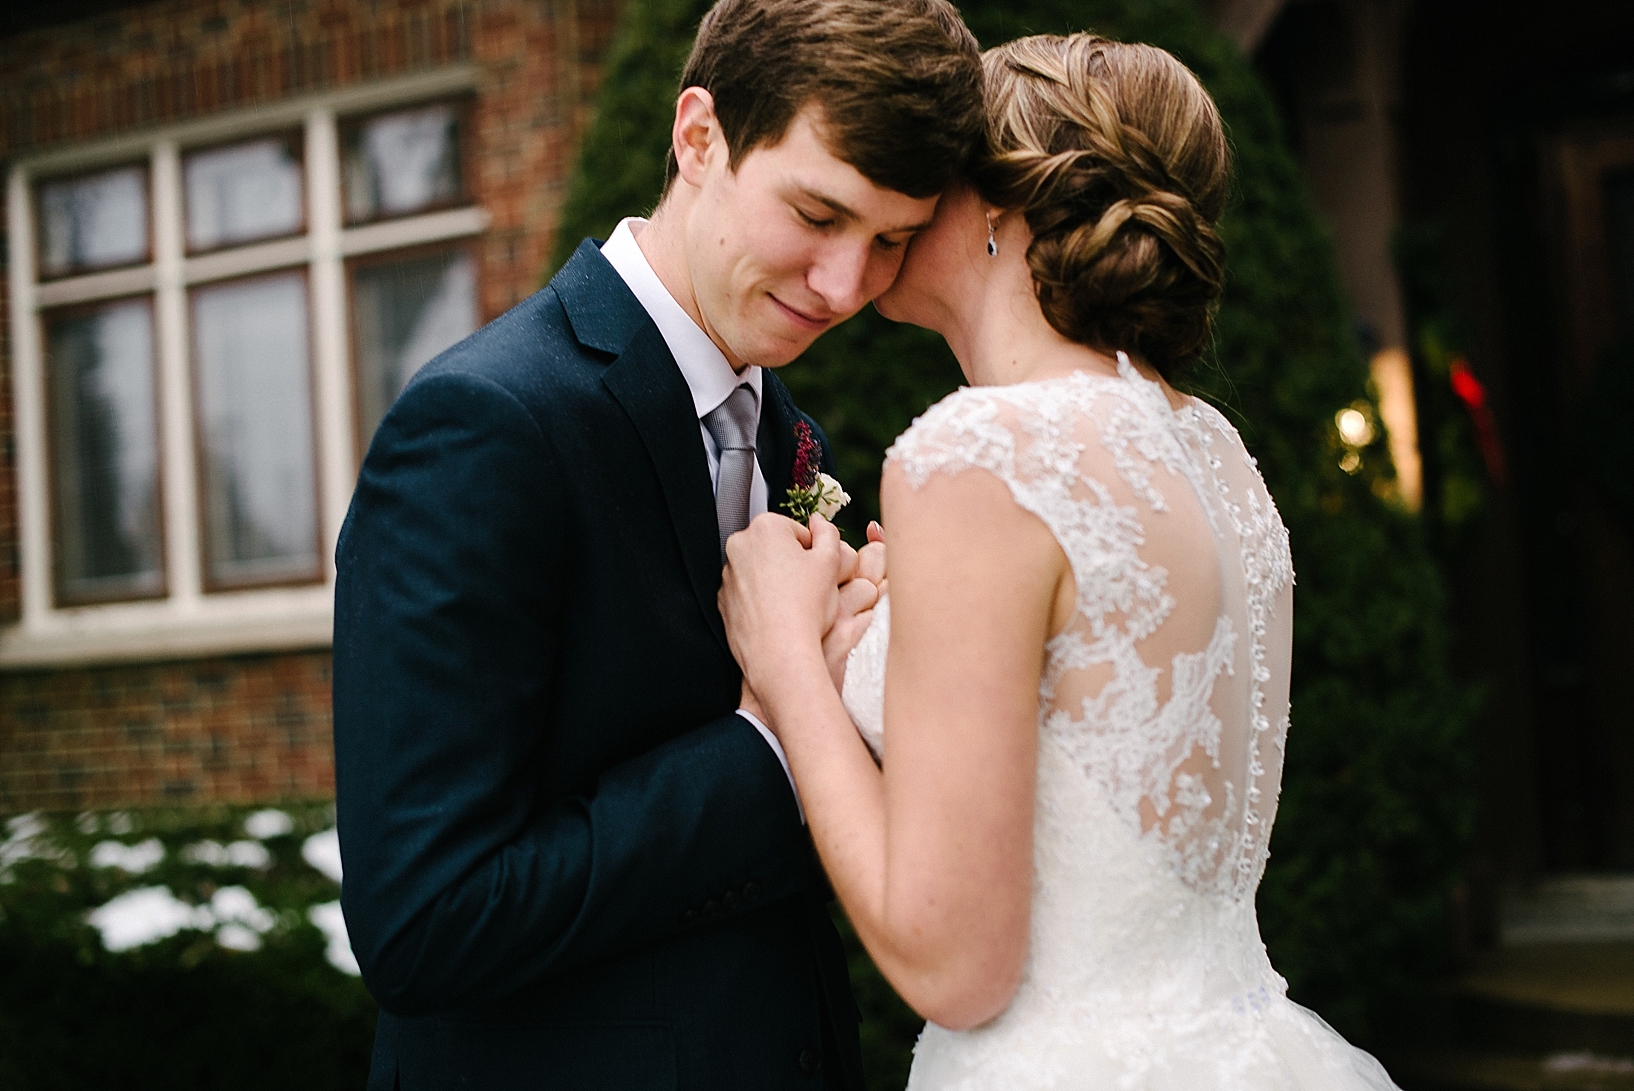 bride with updo and lace back wedding gown holding groom's hands and whispering in his ear